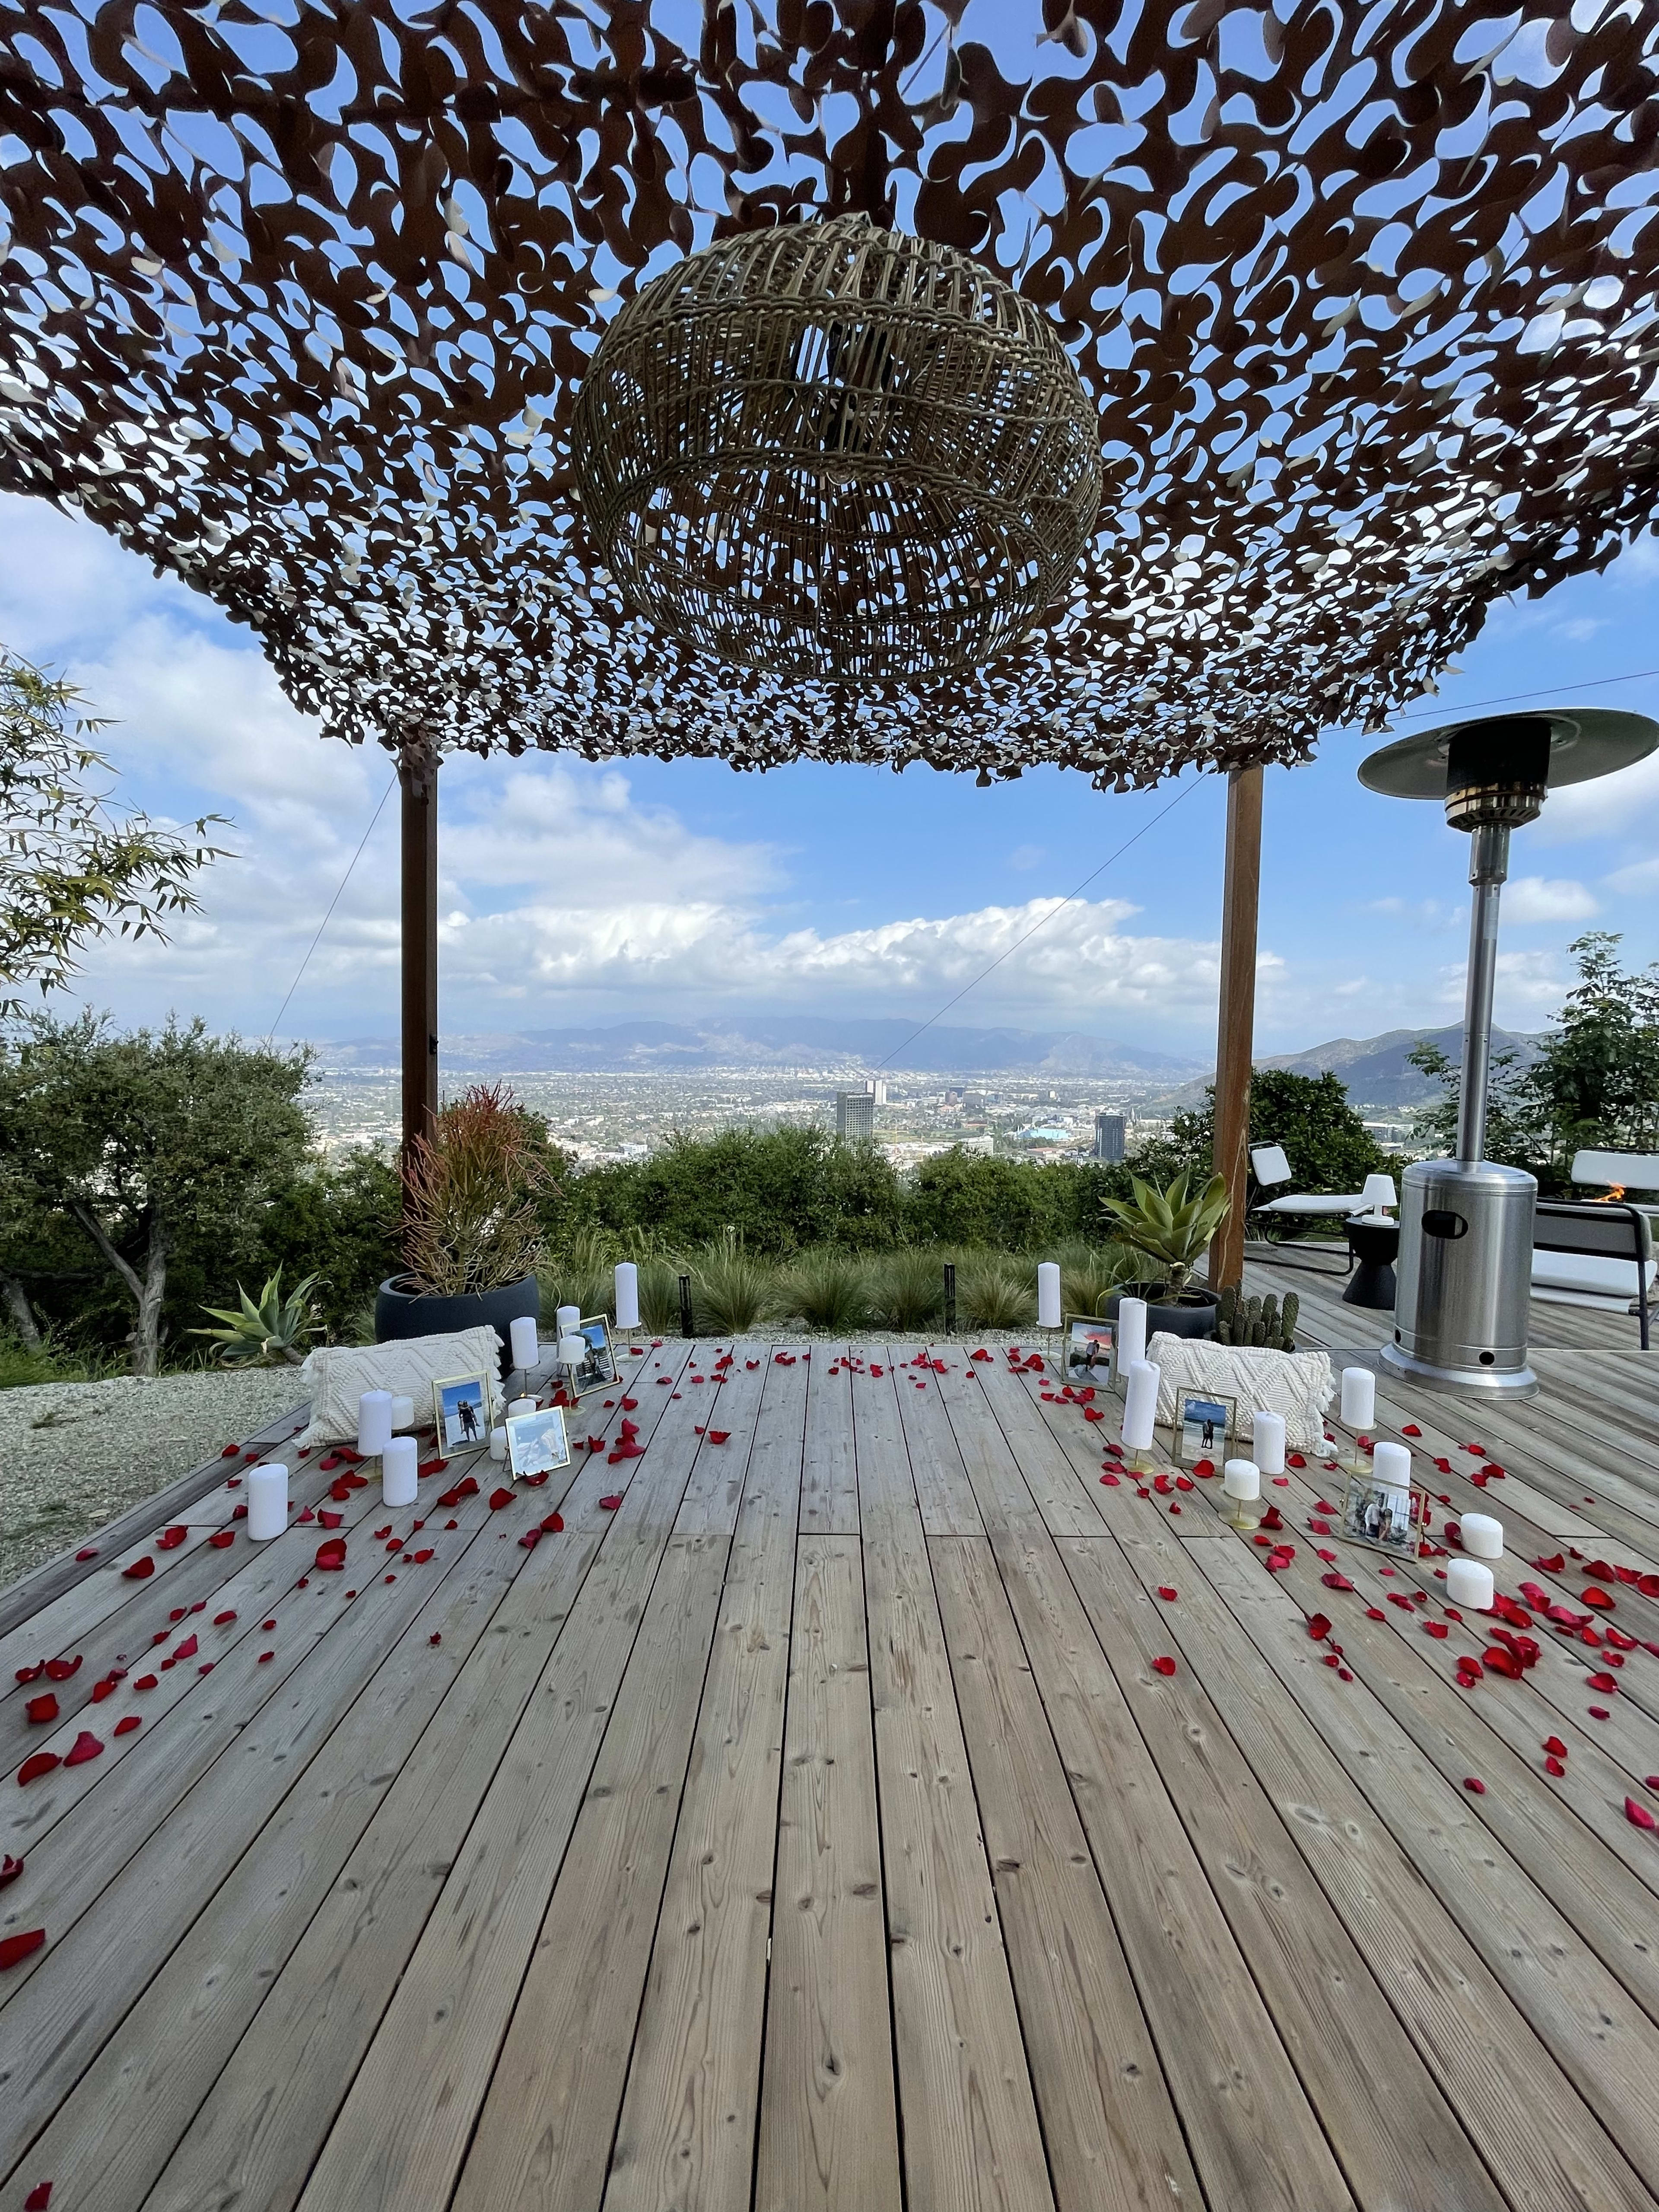 An outdoor deck with rose petals and candles setup for an engagement.